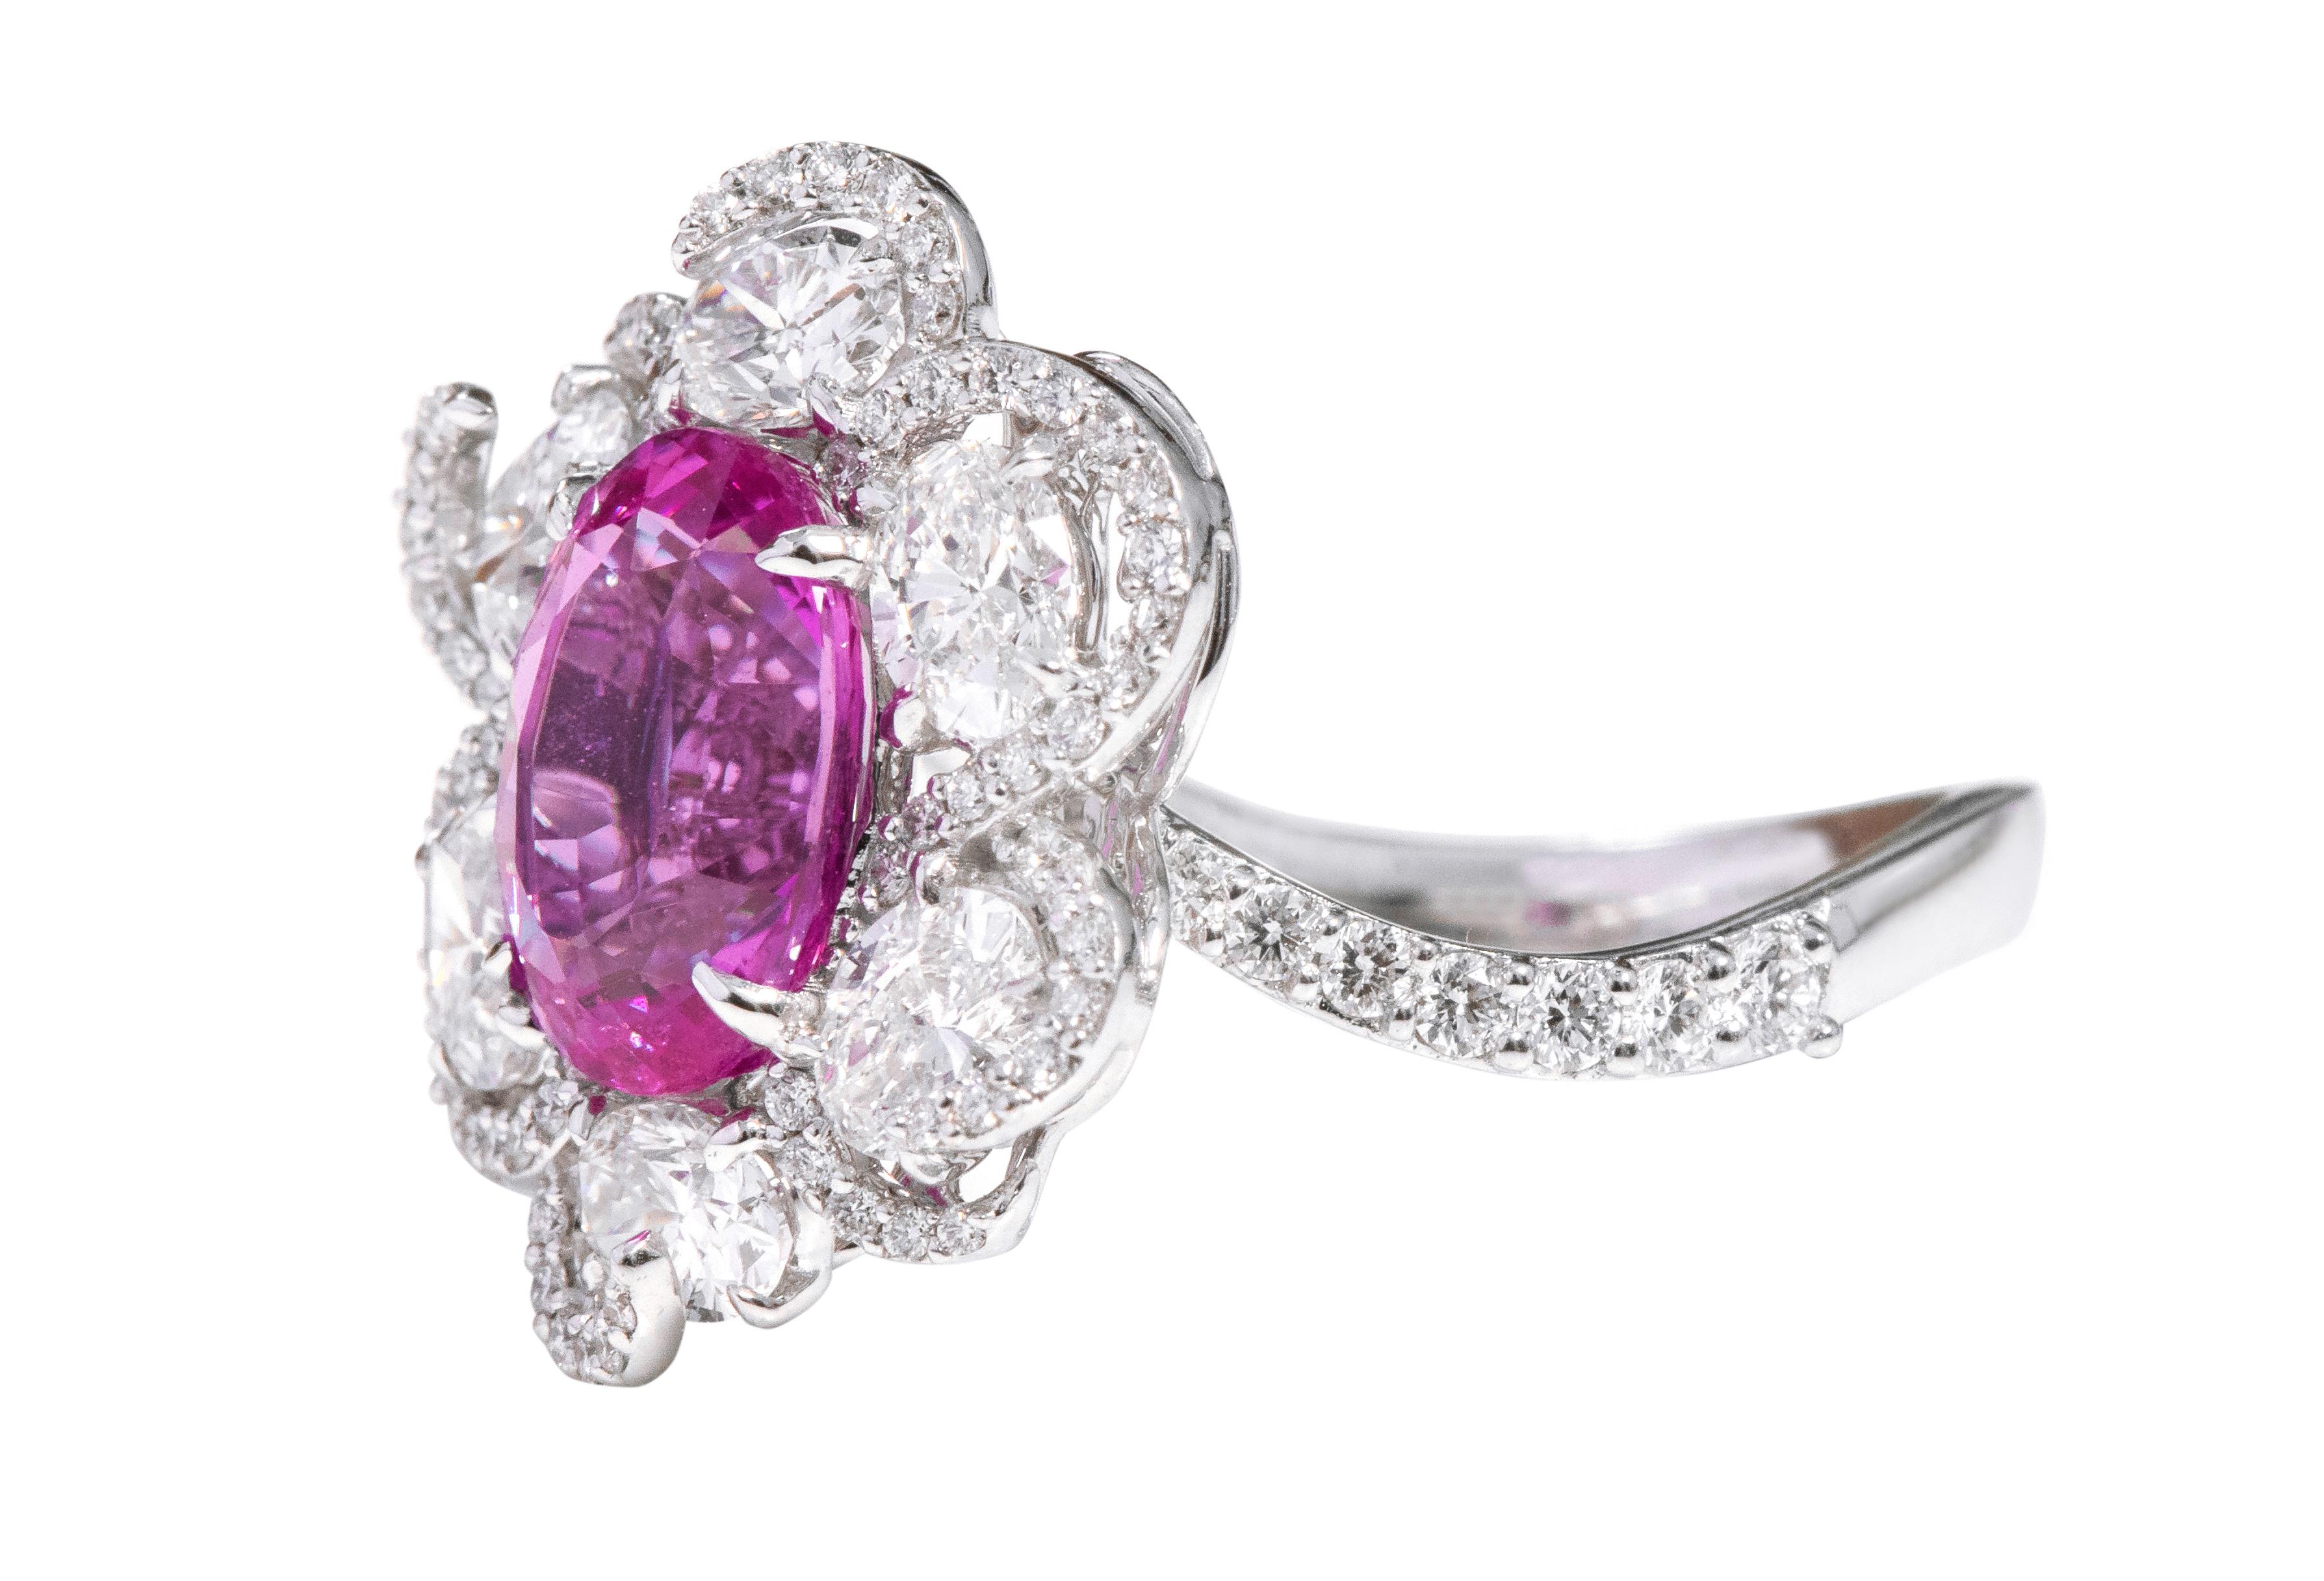 18 Karat White Gold 3.14 Carat Oval-Cut Solitaire Pink-Sapphire and Diamond Cocktail Ring

This incredible fuschia pink sapphire and diamond ring is magical. The leveled-up solitaire oval pink sapphire in the center in the eagle prong setting is